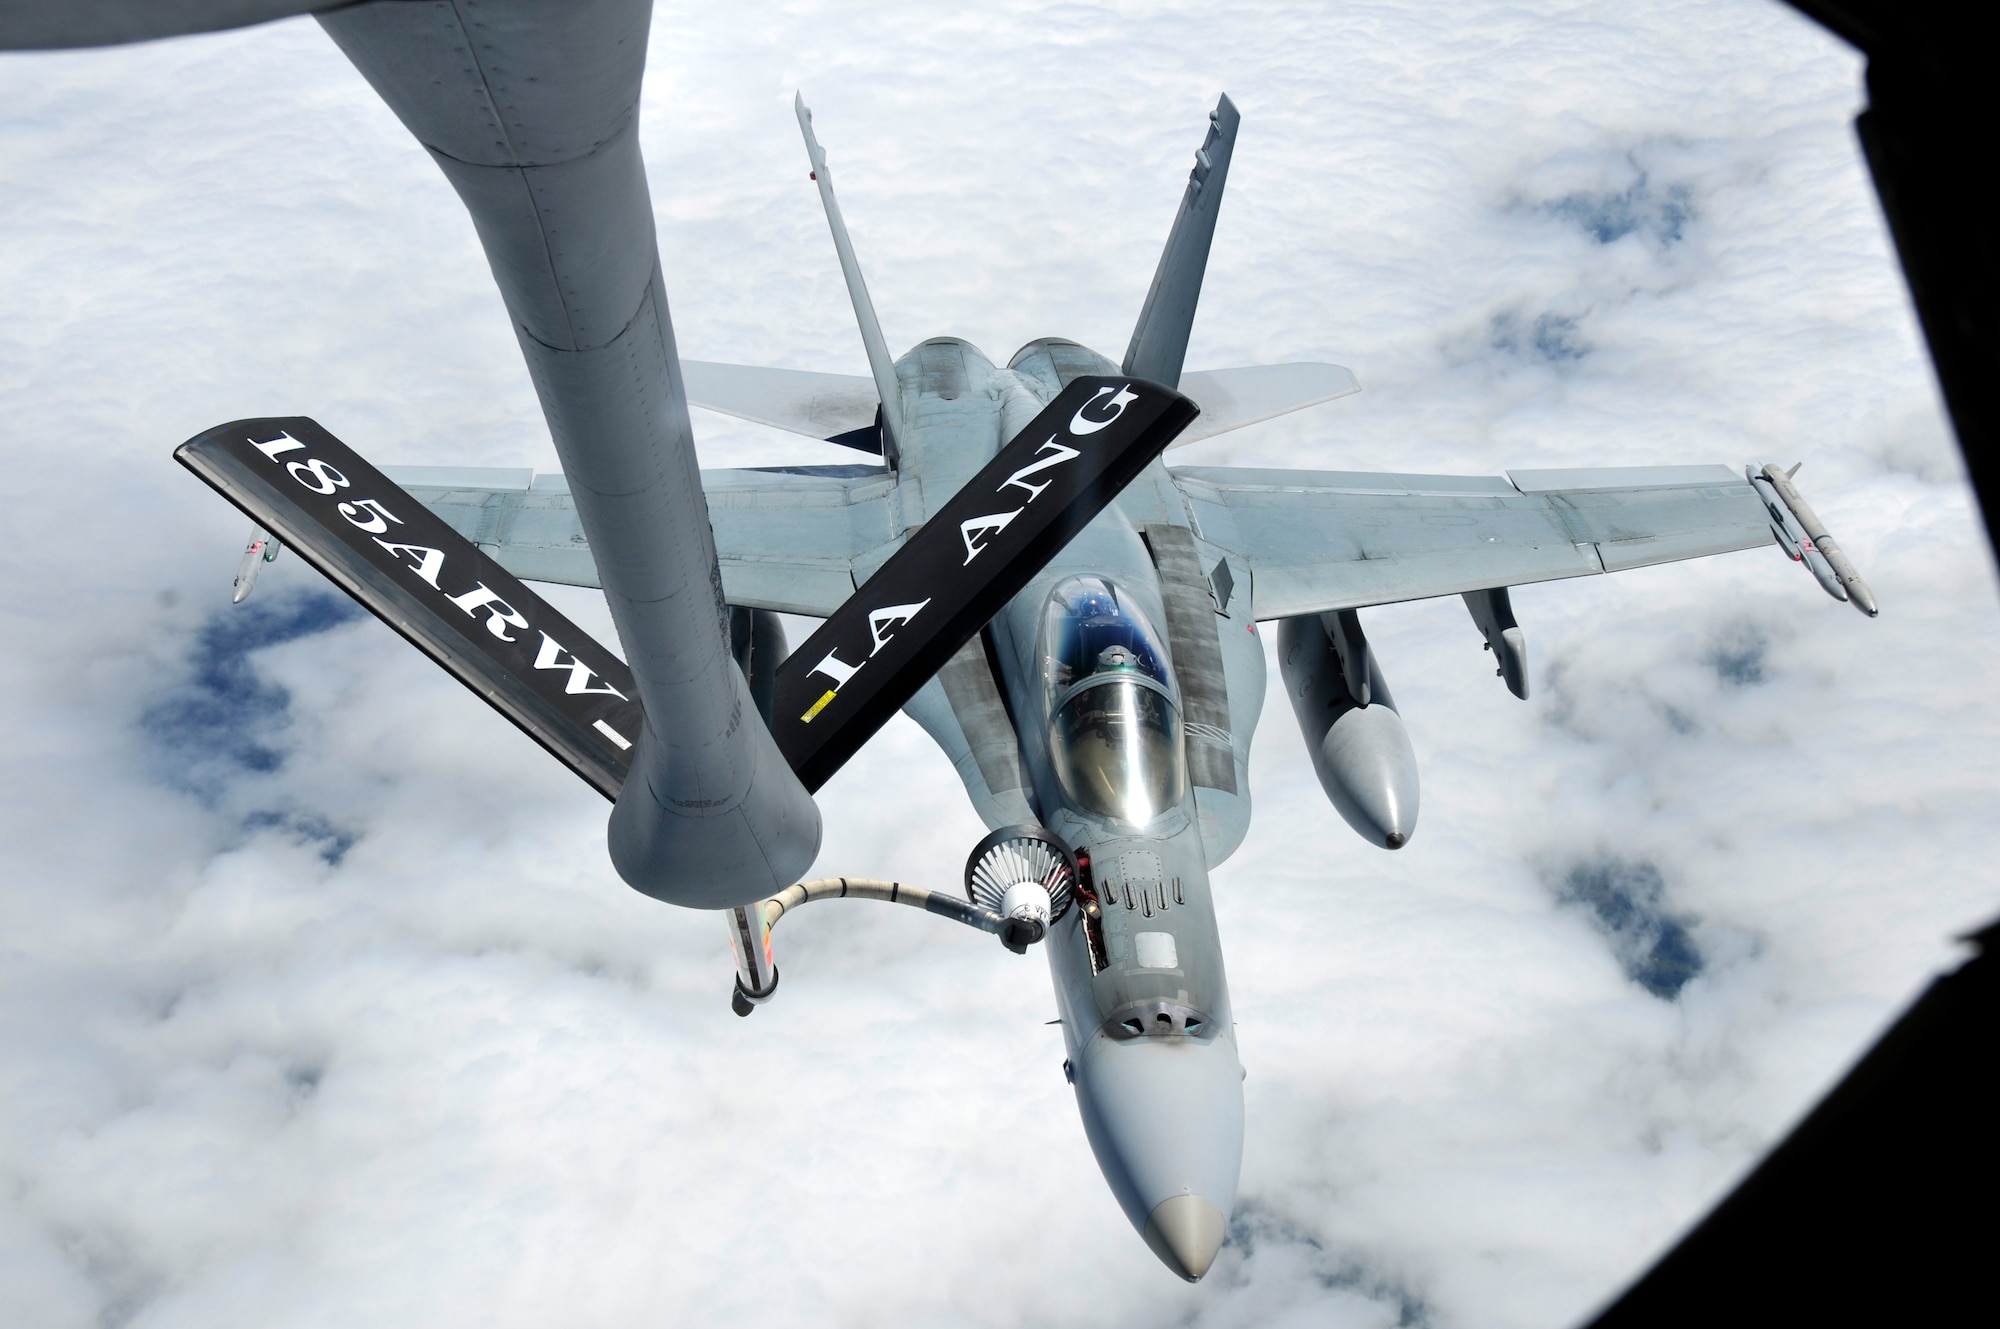 An F-18 Fighter Jet from the Royal Australian Air Force receives fuel from a KC-135 Tanker, from the 185th Air Refueling Wing (ARW) Sioux City, Iowa, Iowa Air National Guard, over the coast of Eastern Australia, in Williamtown, New South Wales, on February 23, 2011. The 185th ARW is participating in a joint flight exercise, "Sentry Down Under", refueling F-16C and F-18 Fighter Jets in Australia.
(USAF Photo/ Tech. Sgt. Oscar M. Sanchez-Alvarez)

